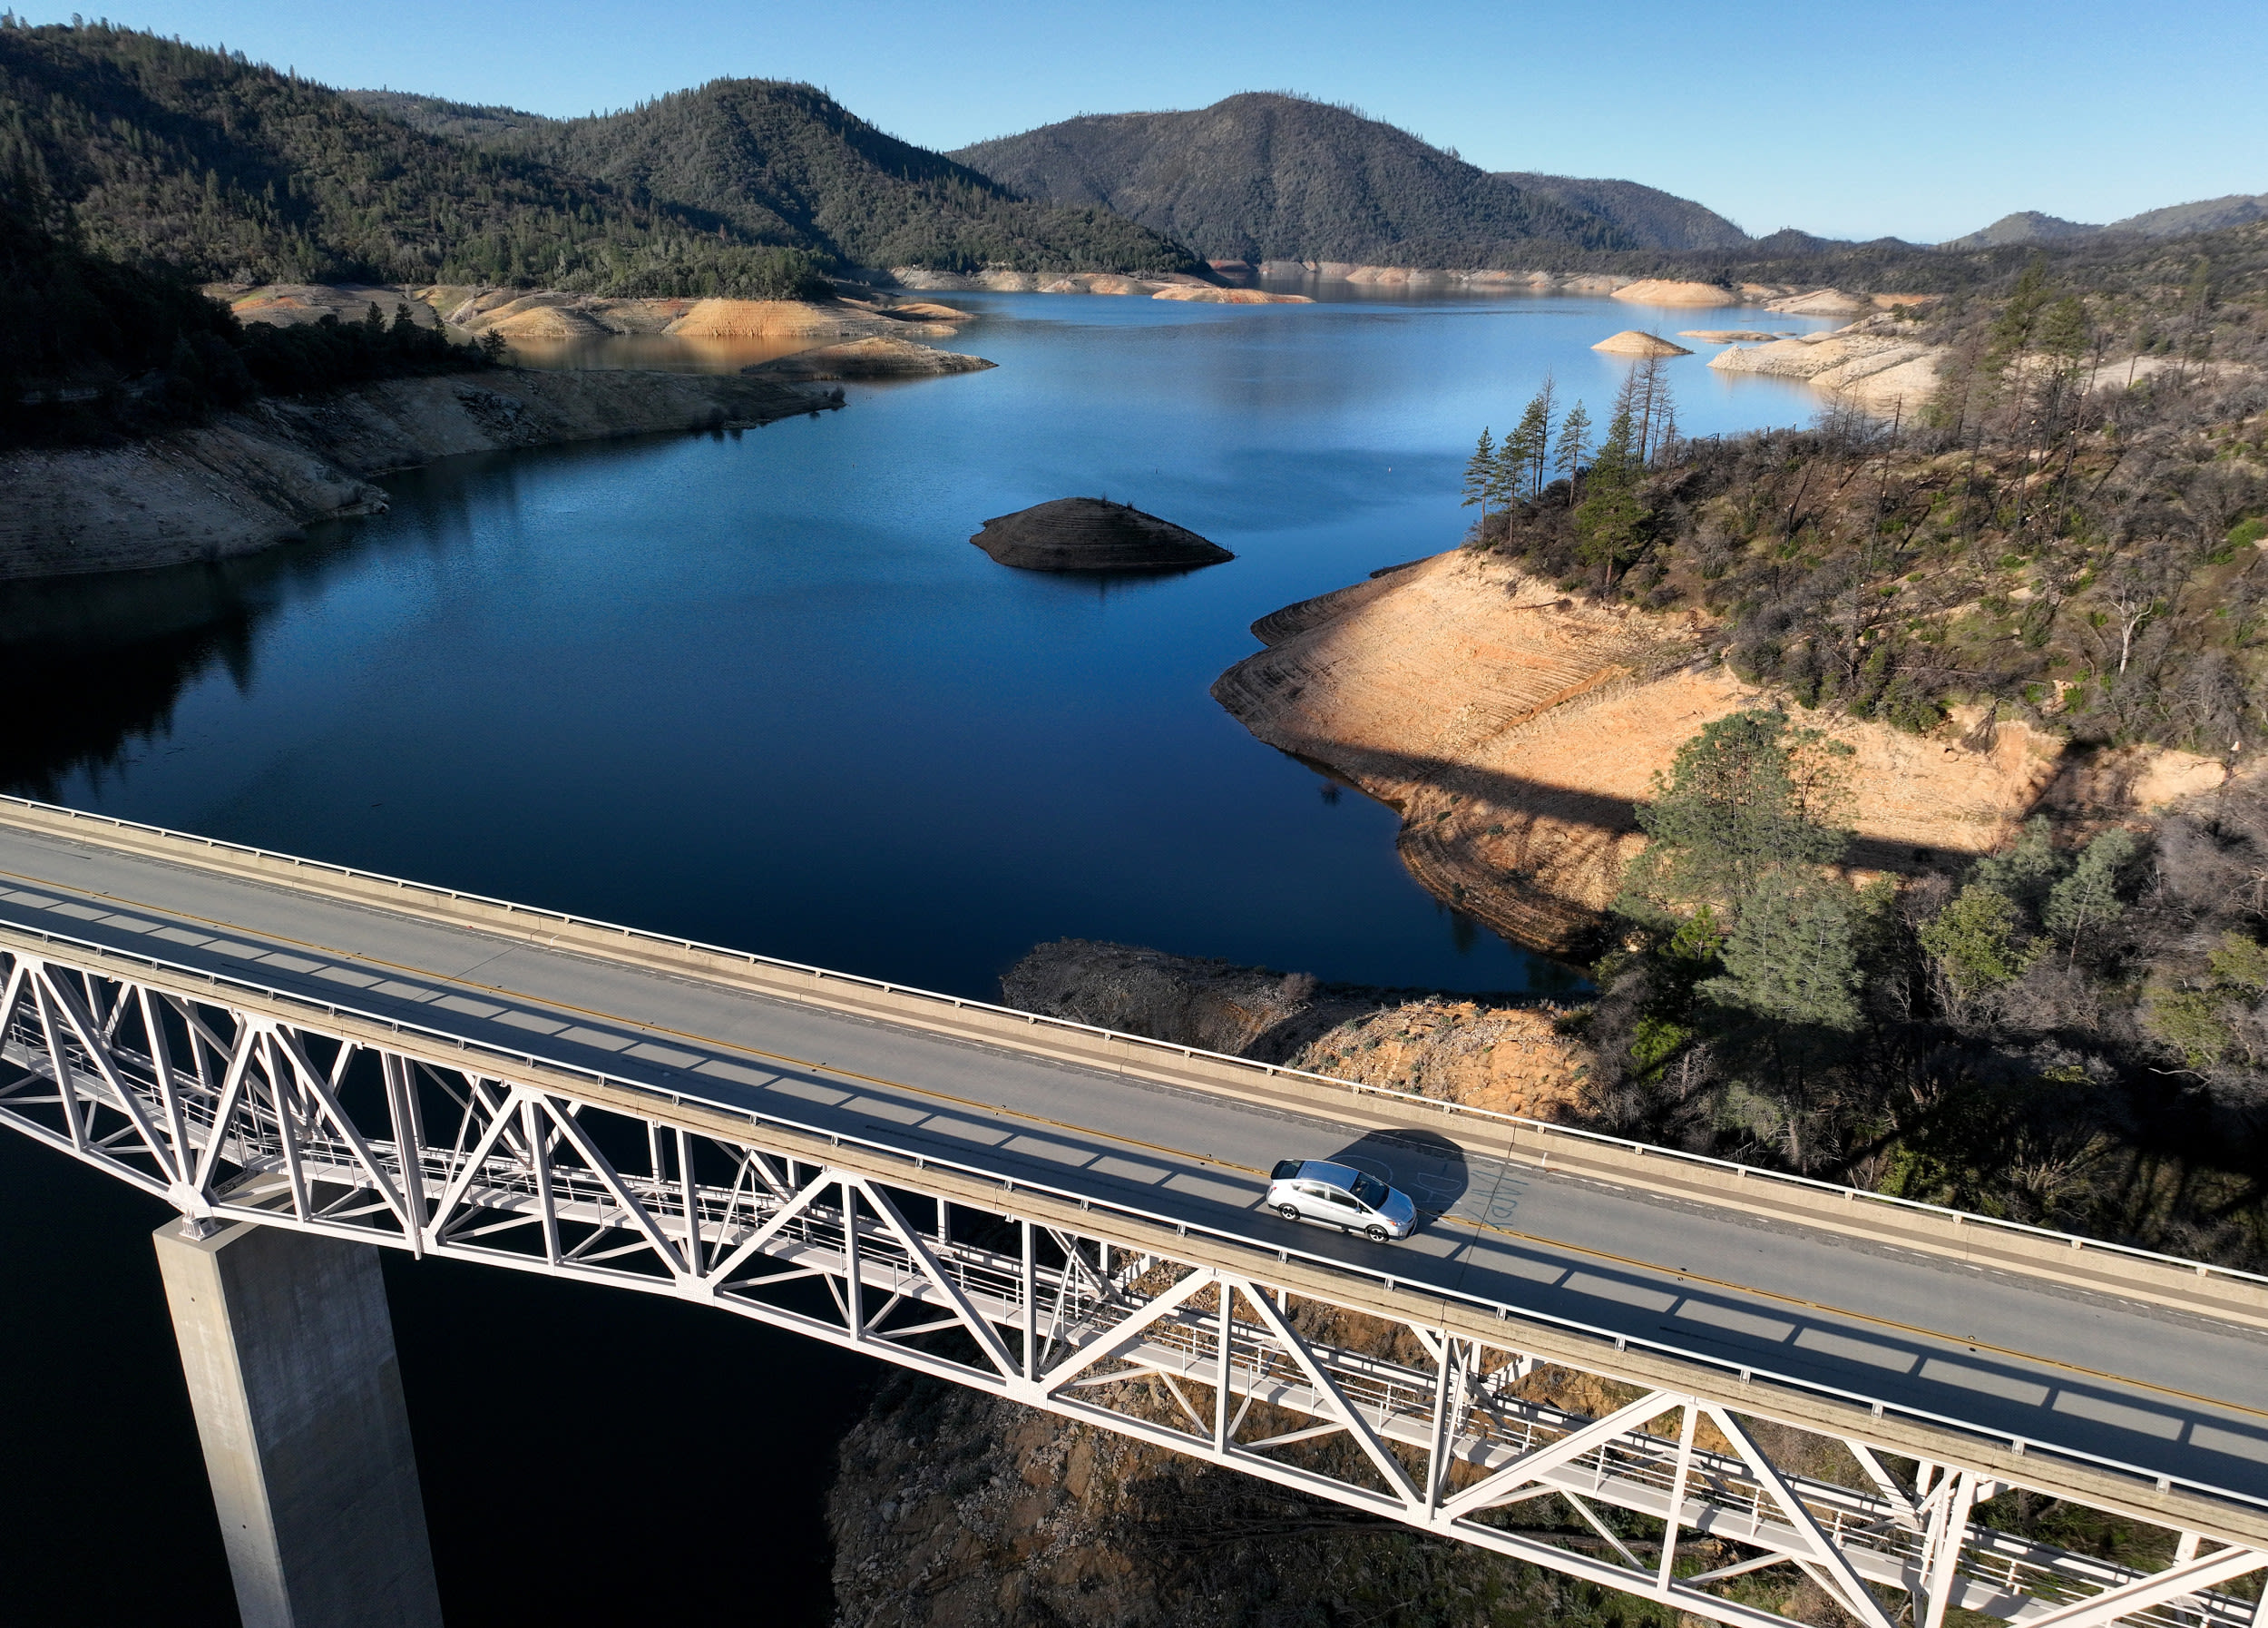 California may have to release water from reservoirs